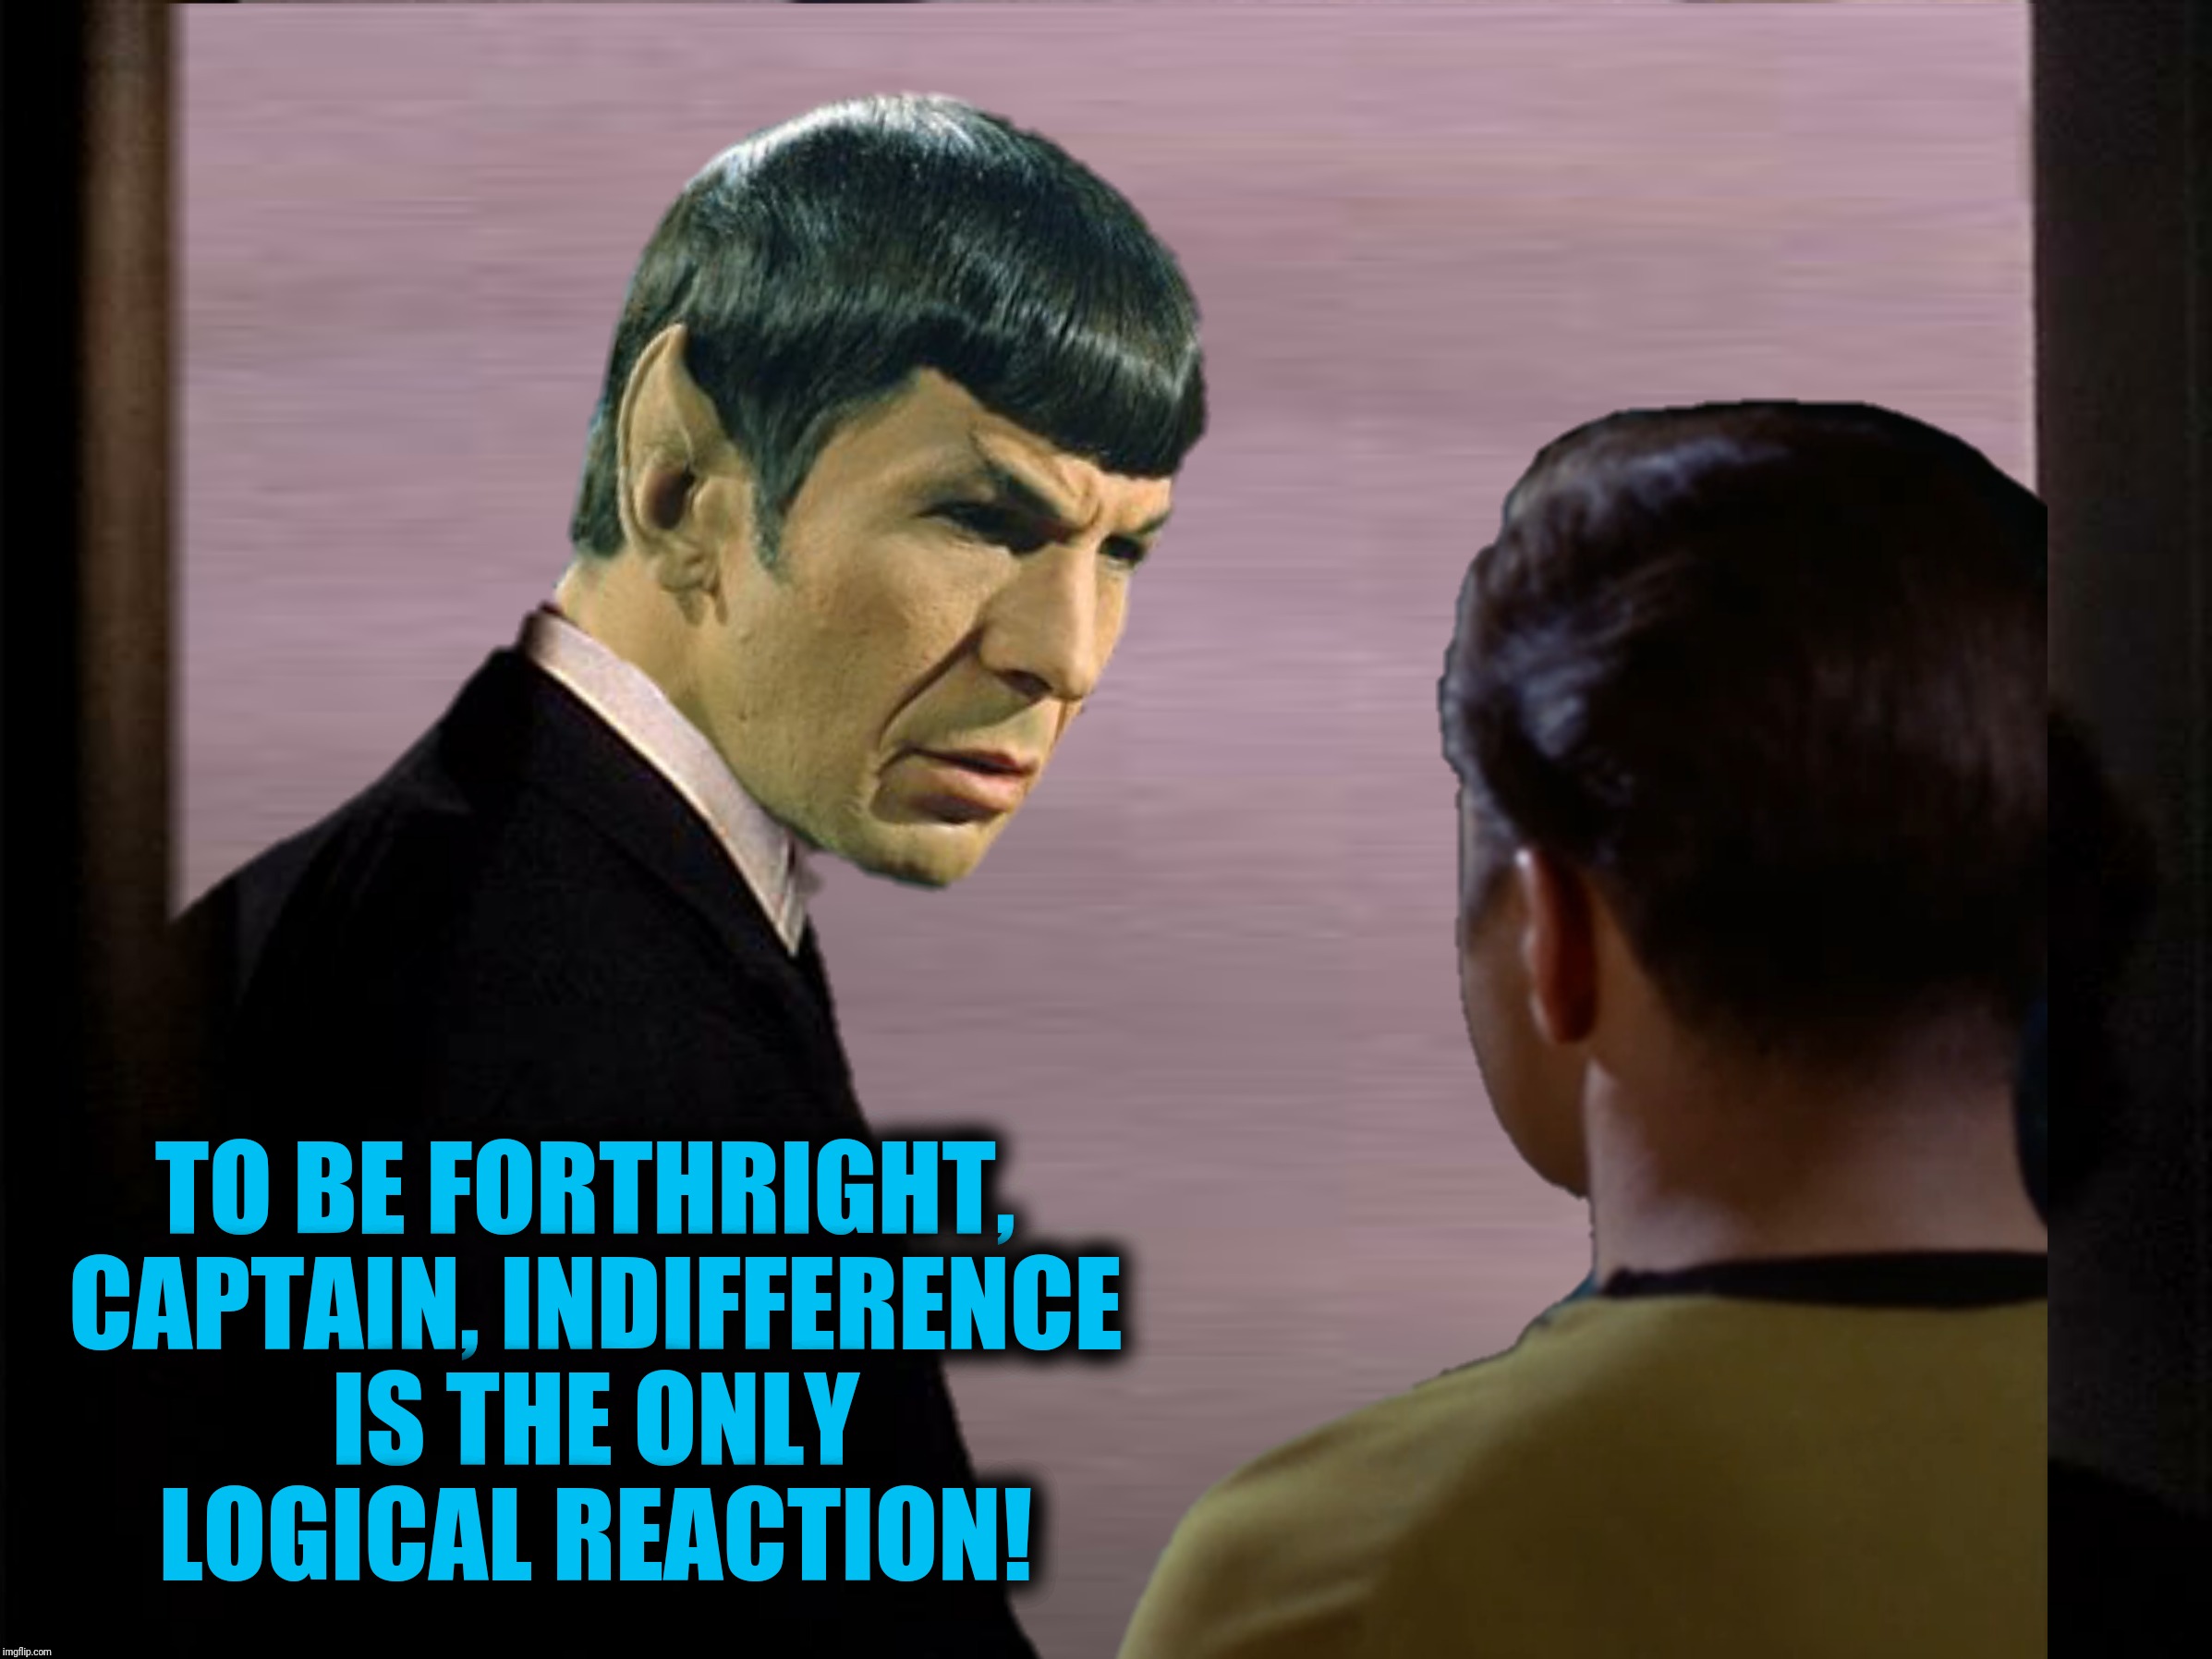 Bad Photoshop Sunday presents:  Frankly, Jim, I don't give a damn! | TO BE FORTHRIGHT, CAPTAIN, INDIFFERENCE IS THE ONLY LOGICAL REACTION! | image tagged in bad photoshop sunday,star trek,mr spock,captain kirk,gone with the wind | made w/ Imgflip meme maker